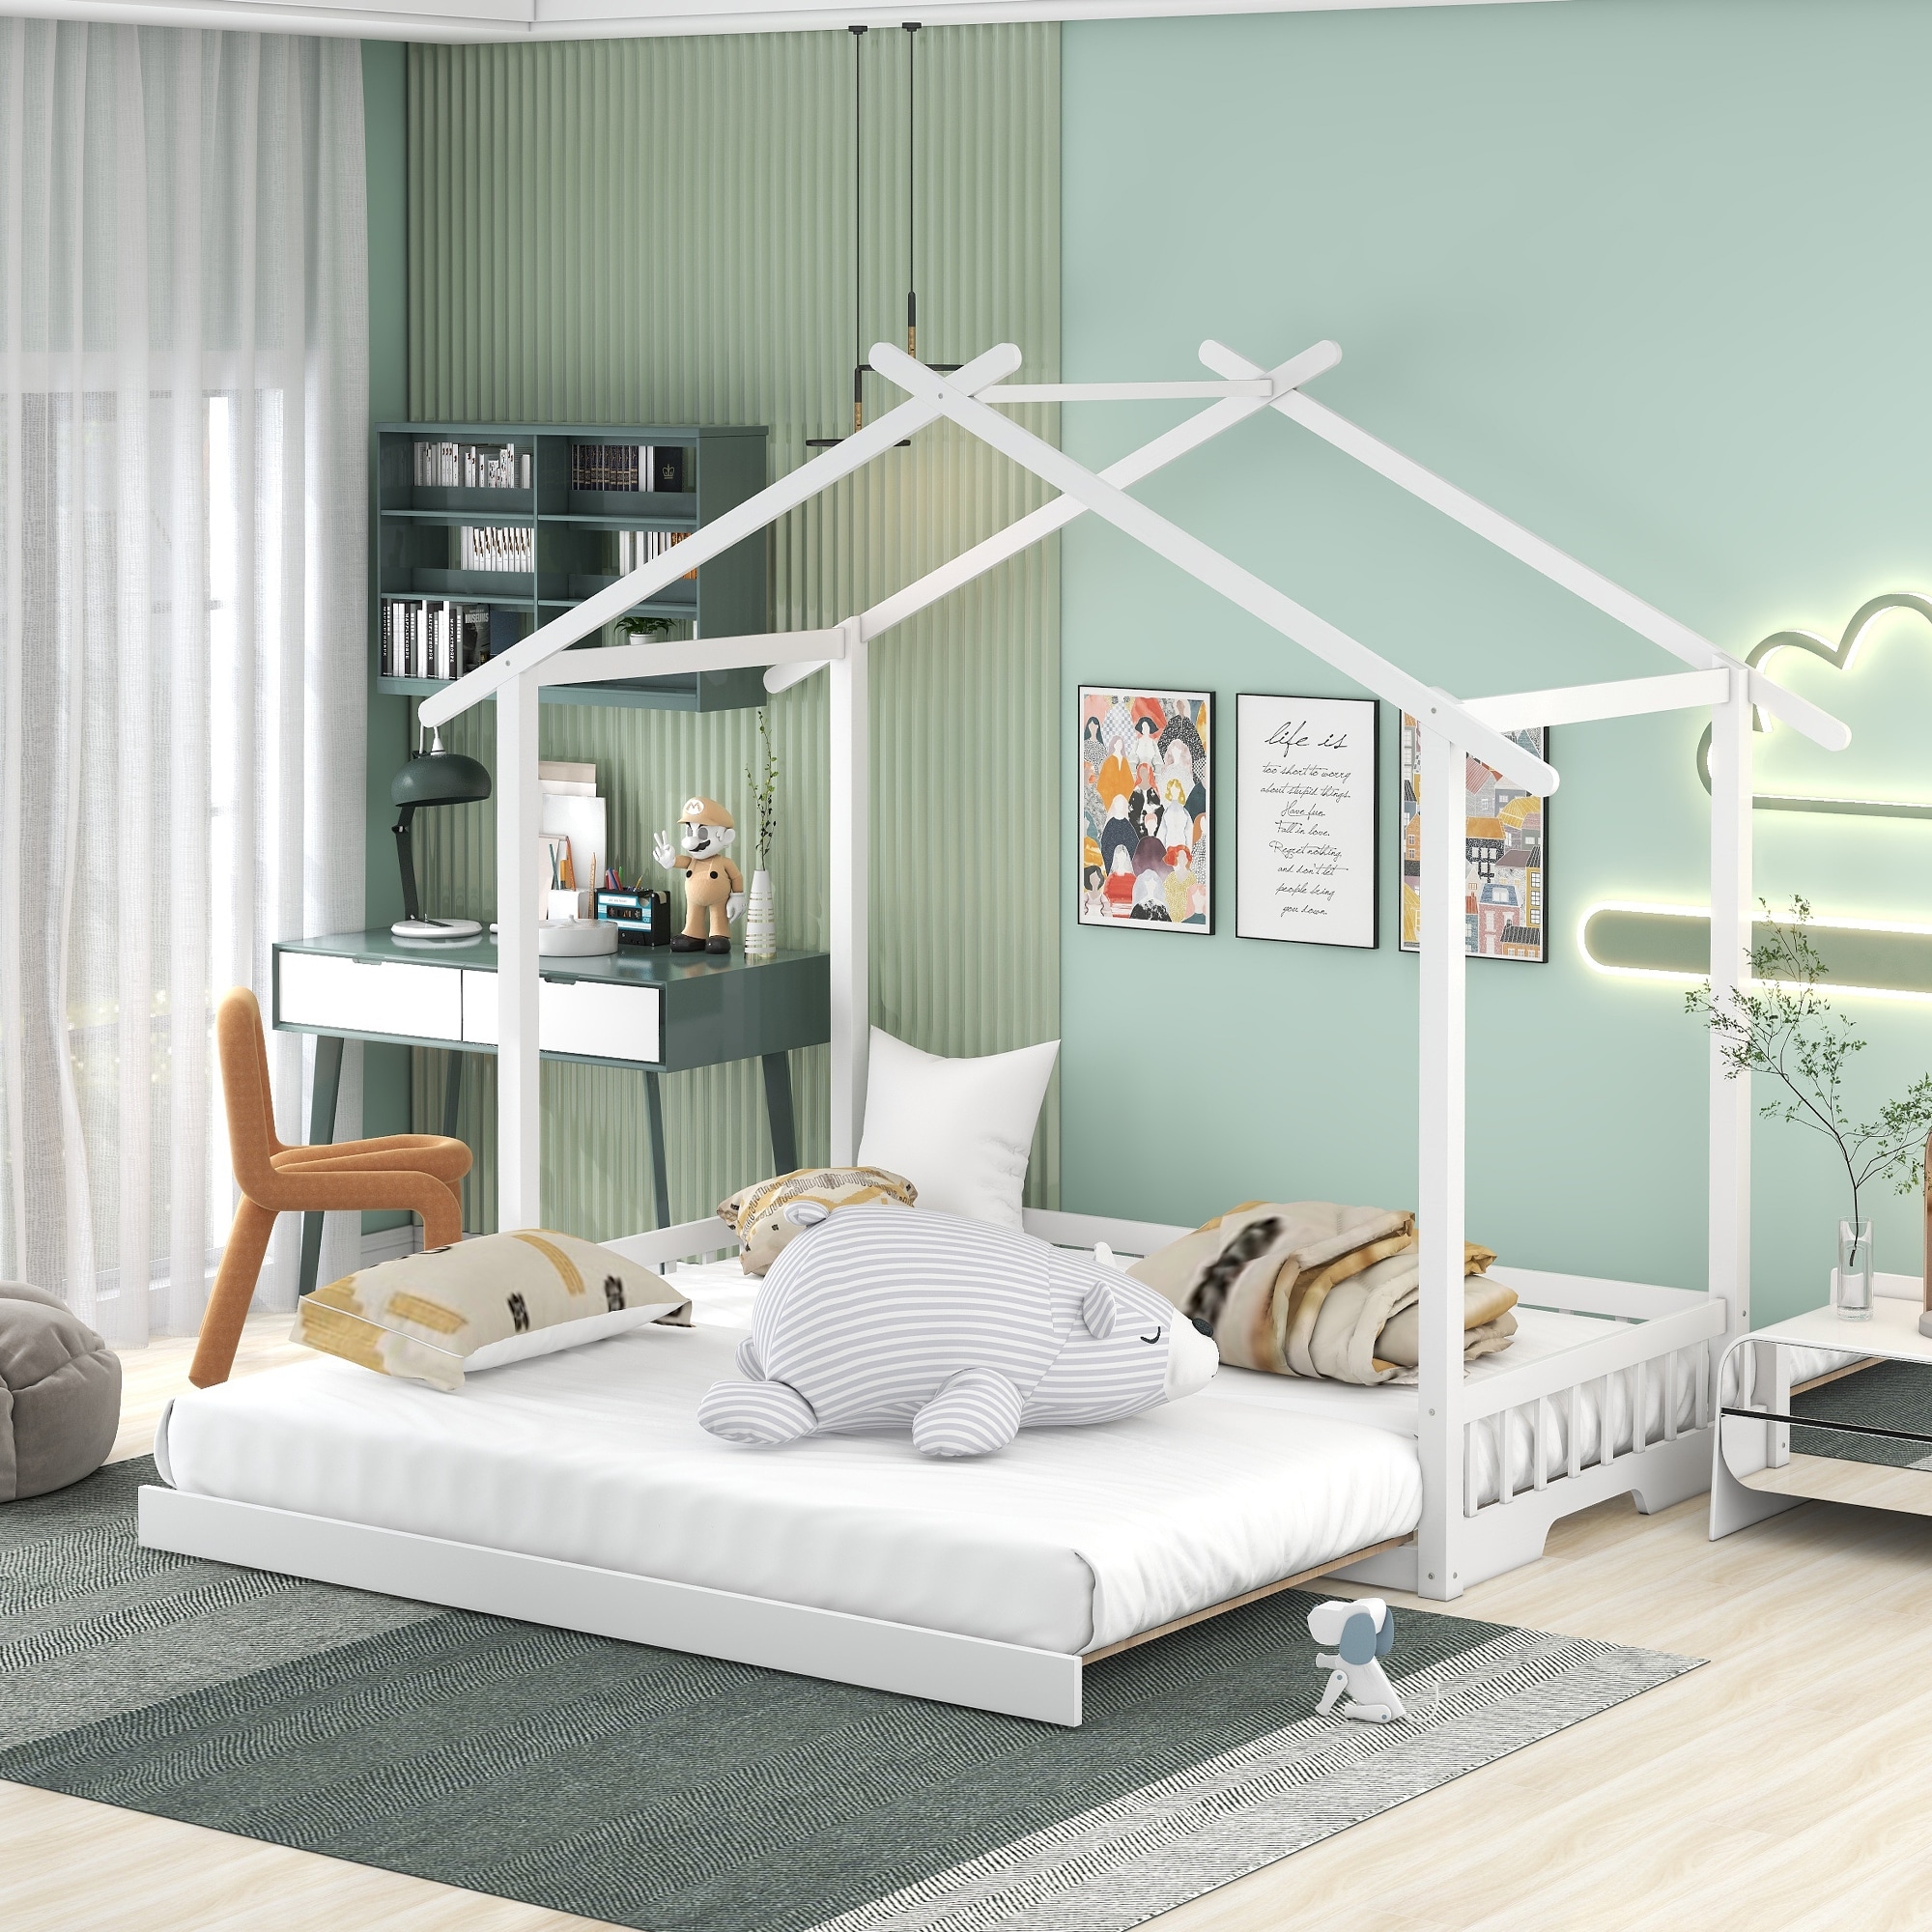 https://ak1.ostkcdn.com/images/products/is/images/direct/6153dc98c098908fbc9282cf68288c1cede5be4d/Twin-to-King-Extending-House-Bed%2C-Wooden-Daybed-with-Trundle-for-Kids-Teens-Boys-Girls%2C-No-Box-Spring-Needed%2C-White.jpg